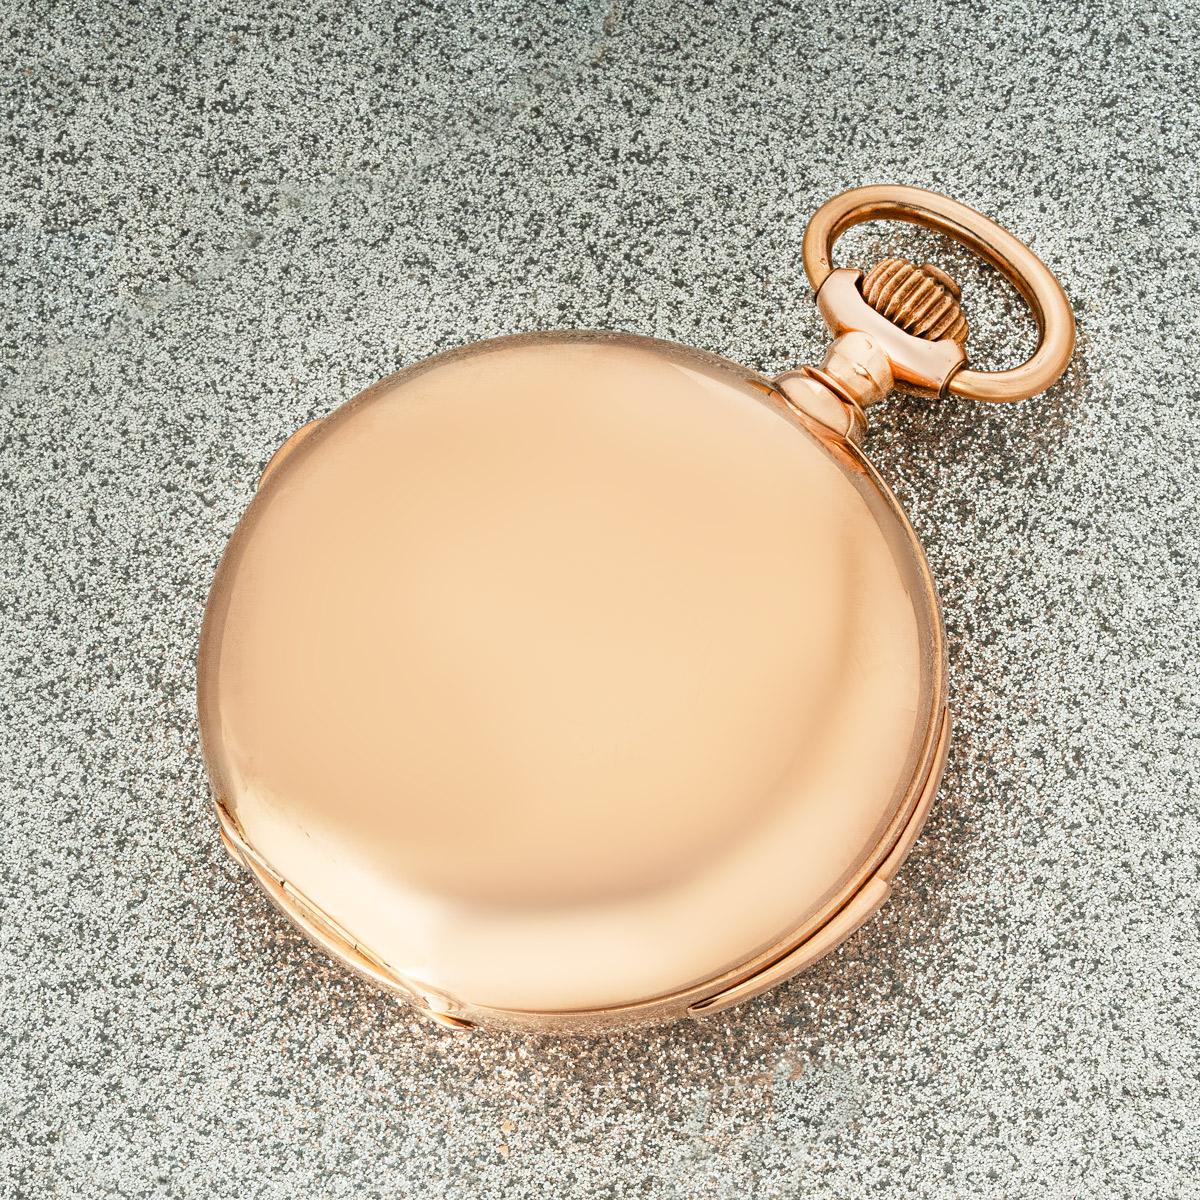 Vulcain. An 18ct Rose Gold Minute Repeater Chronograph Full Hunter  Pocket Watch 3